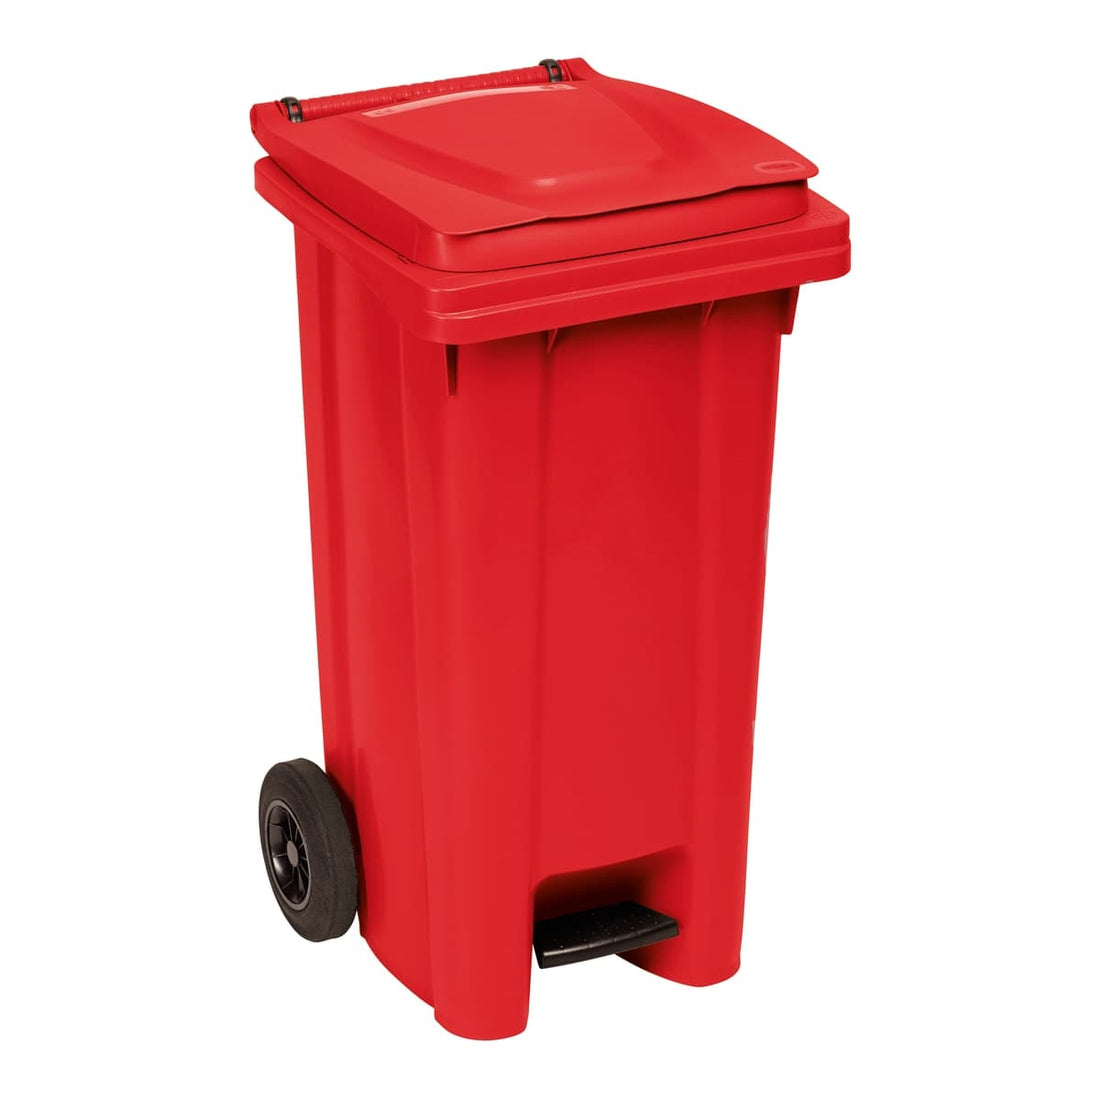 120LT WHEELED BIN WITH SIGNAL RED PEDAL - best price from Maltashopper.com BR410007617